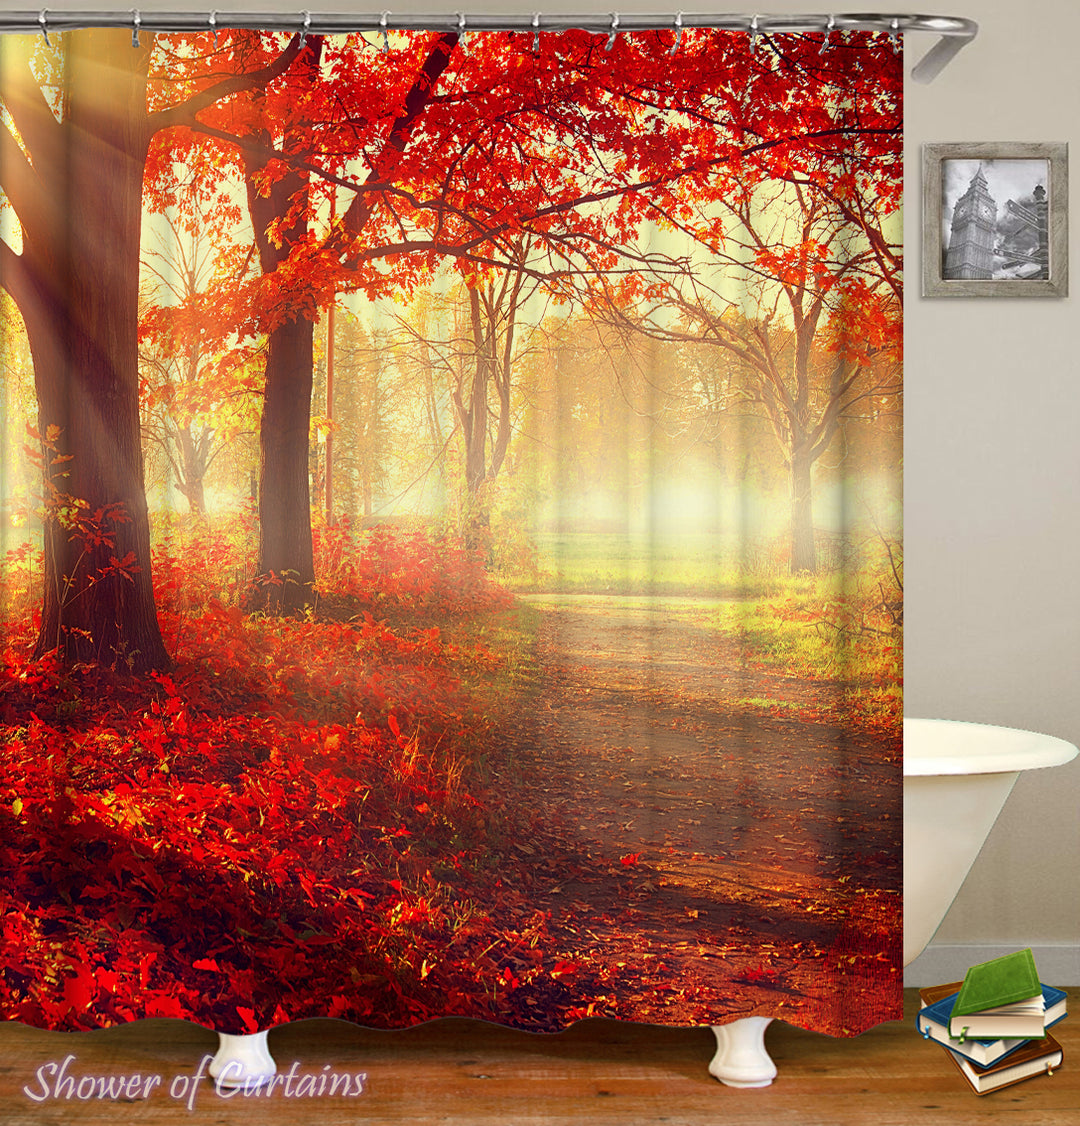 Sunset In The Autumn shower curtain